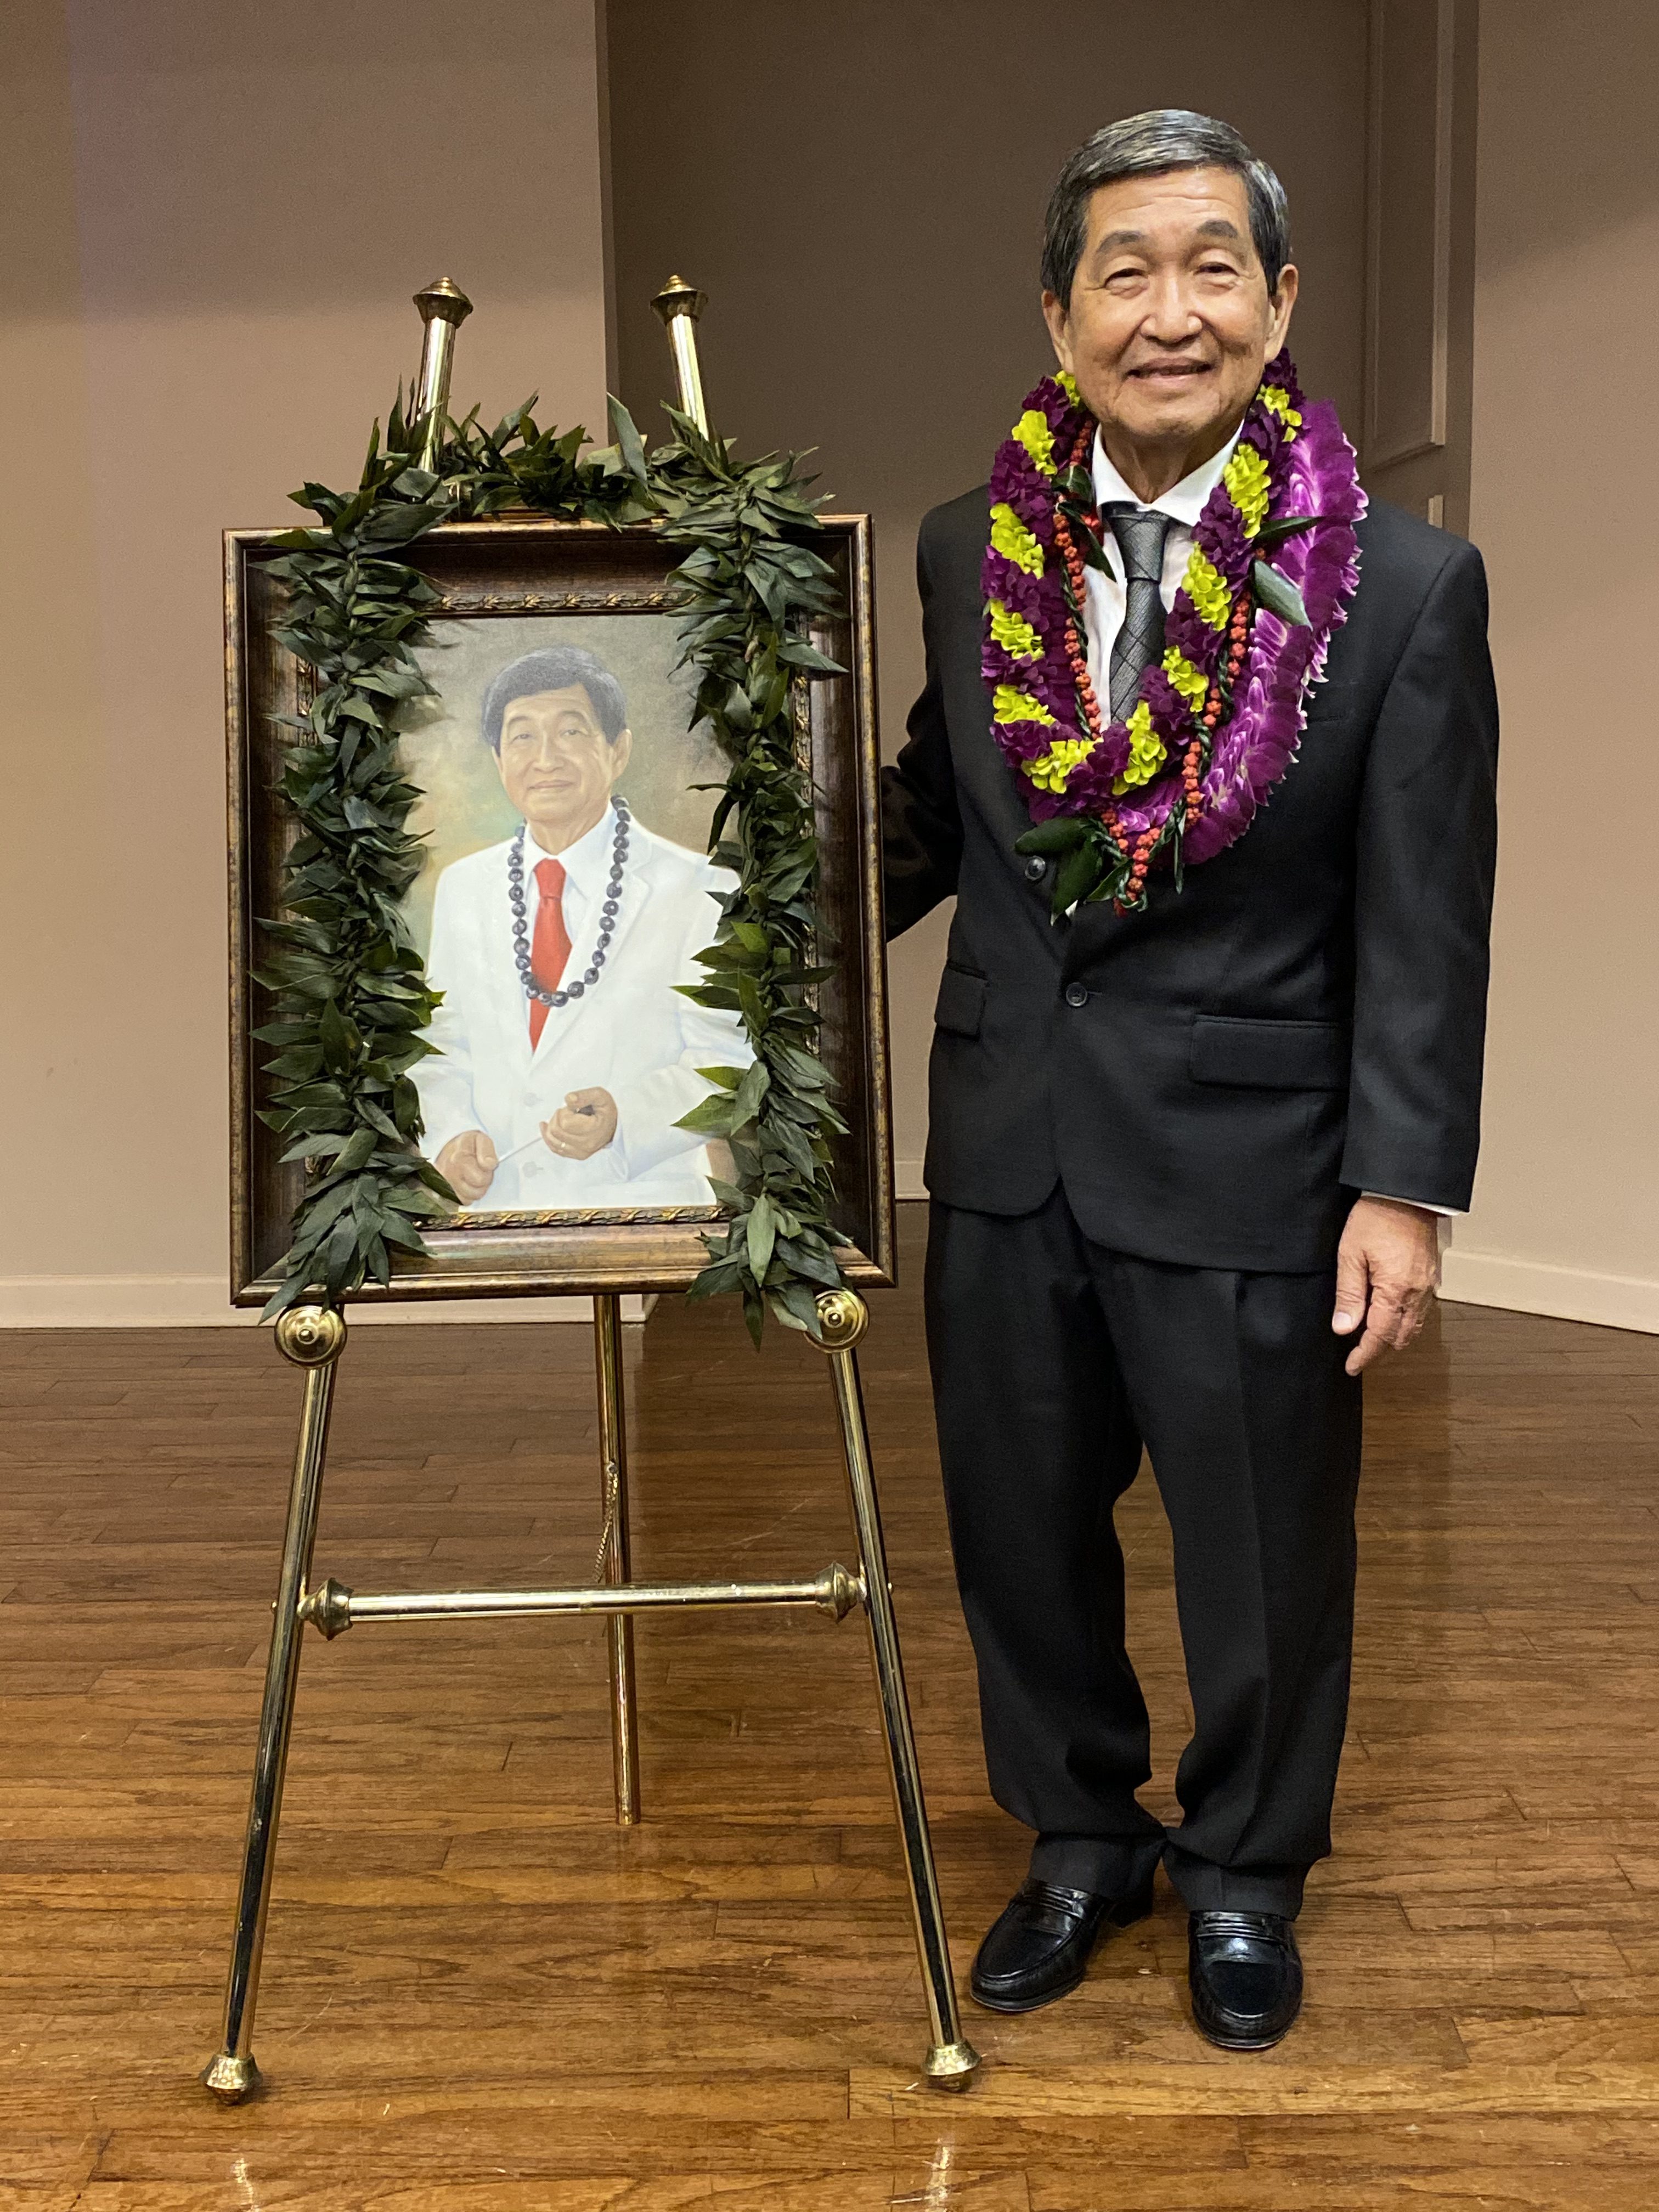 Michael Nakasone standing next to an easel with a painted portrait of himself.